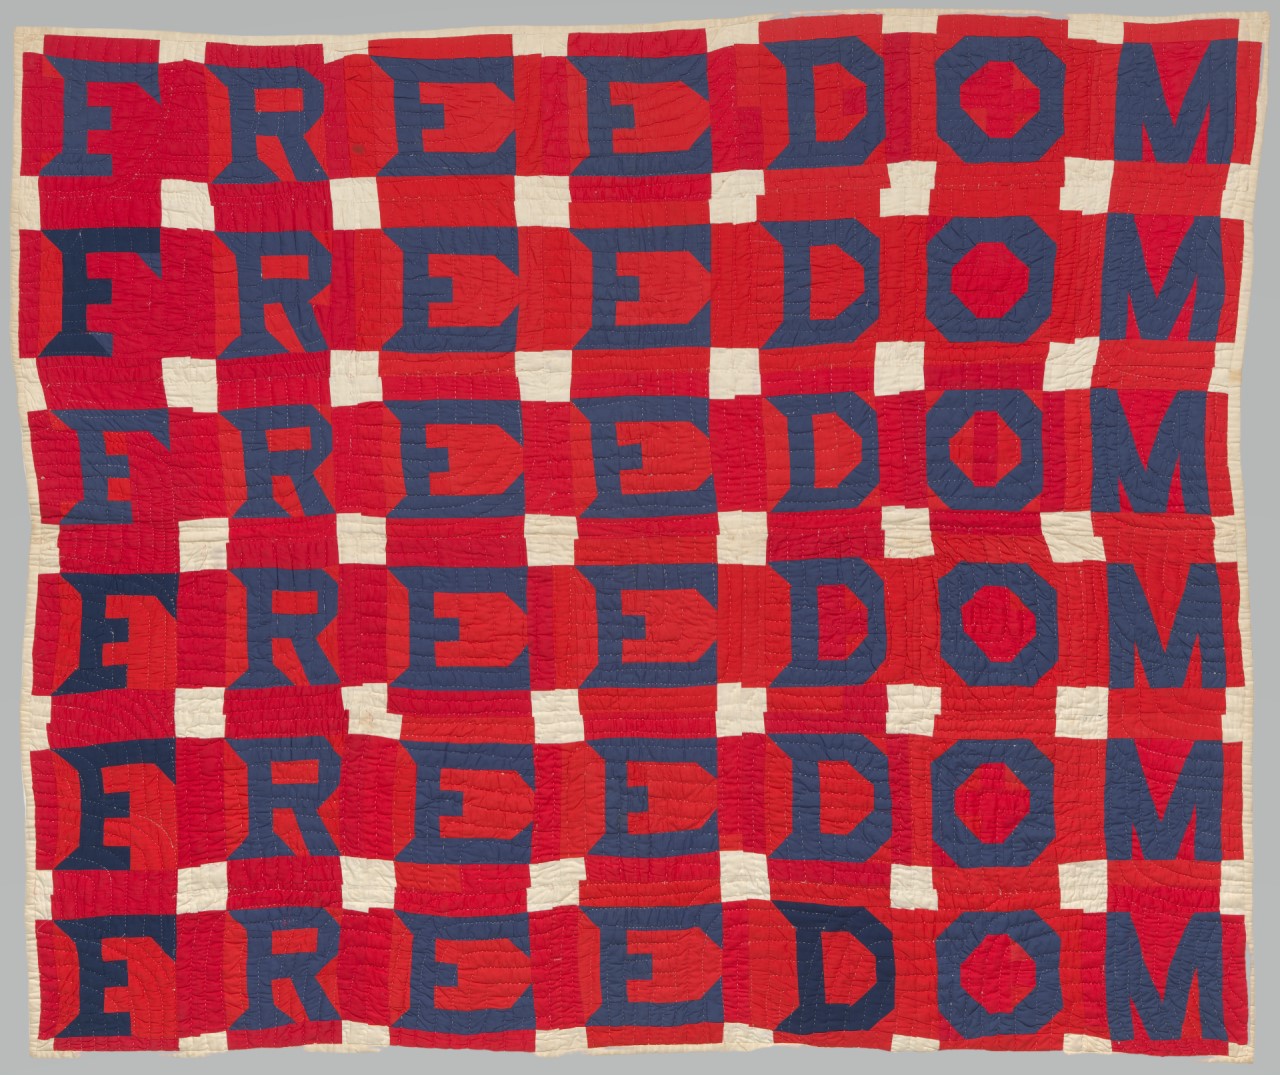 "Freedom Quilt" created by Telfair, Jessie Bell Williams in 1975 (Source: Smithsonian National Museum of African American History & Culture)